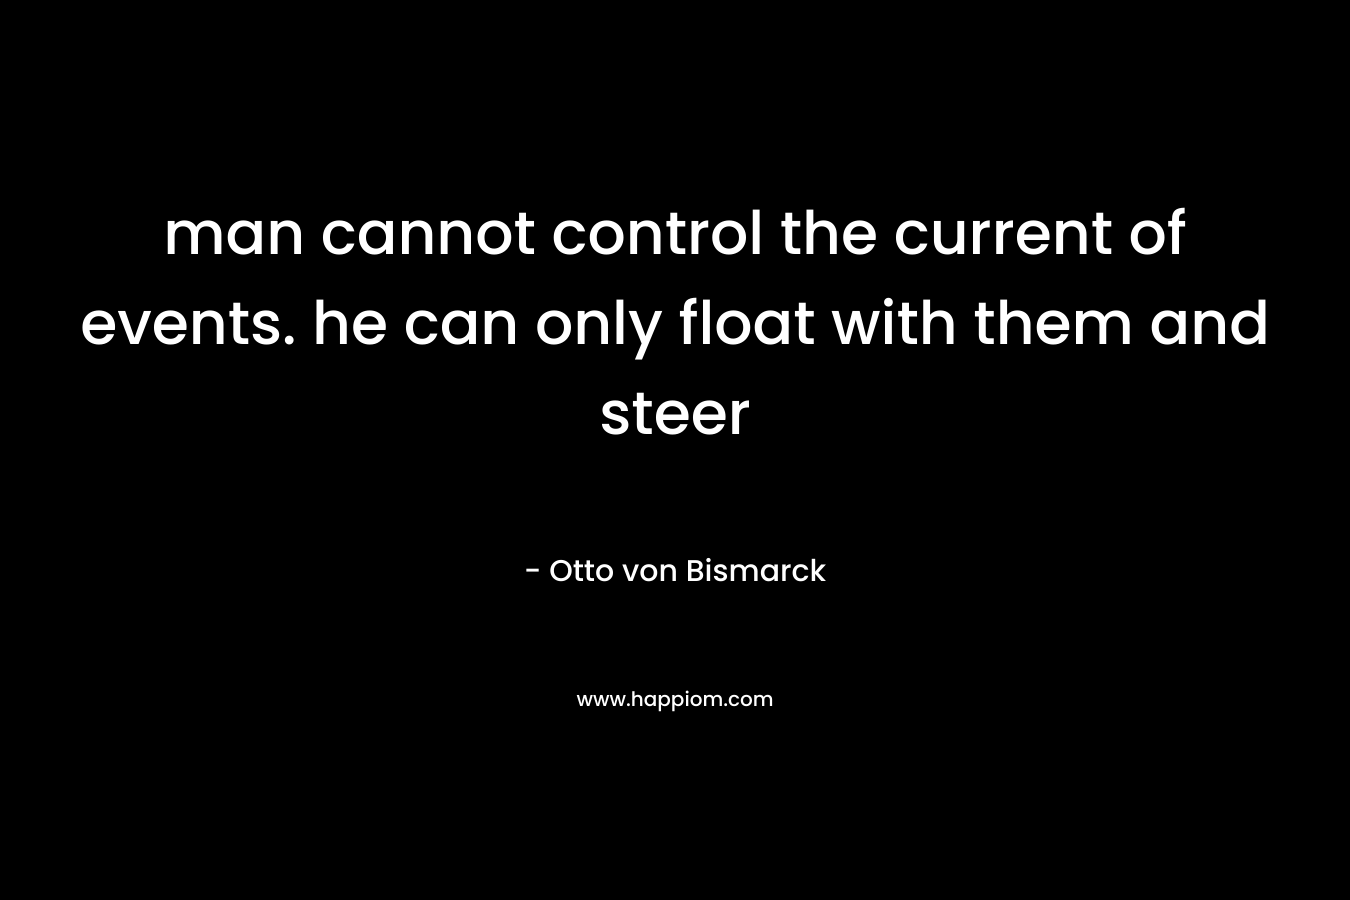 man cannot control the current of events. he can only float with them and steer – Otto von Bismarck